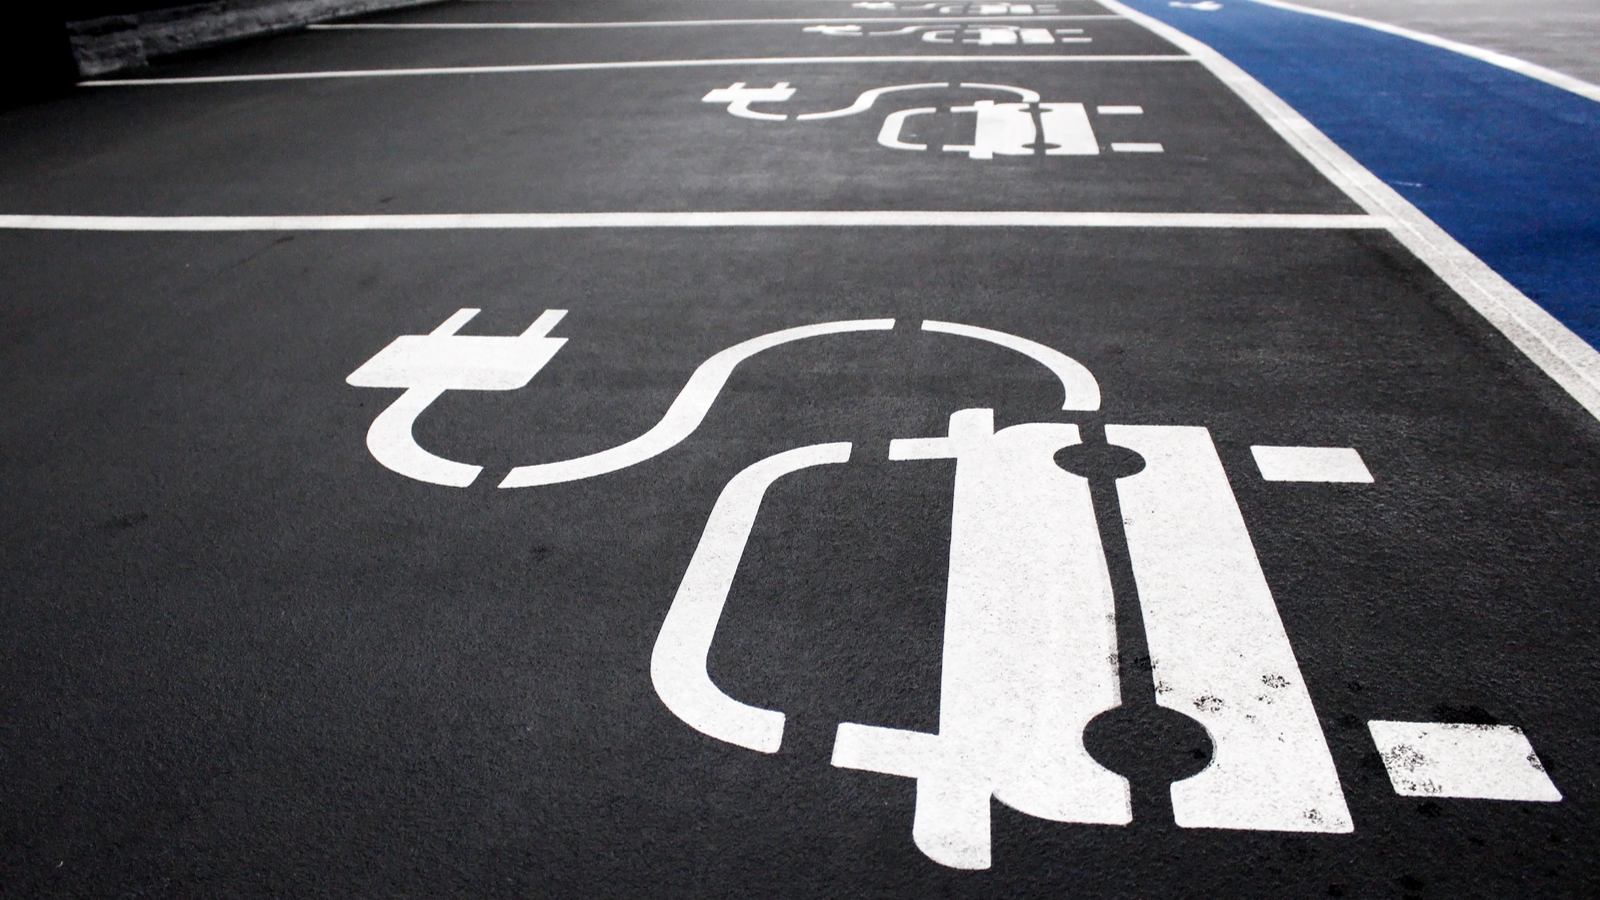 An image of parking spaces in a parking lot with EV charging icons painted on the ground